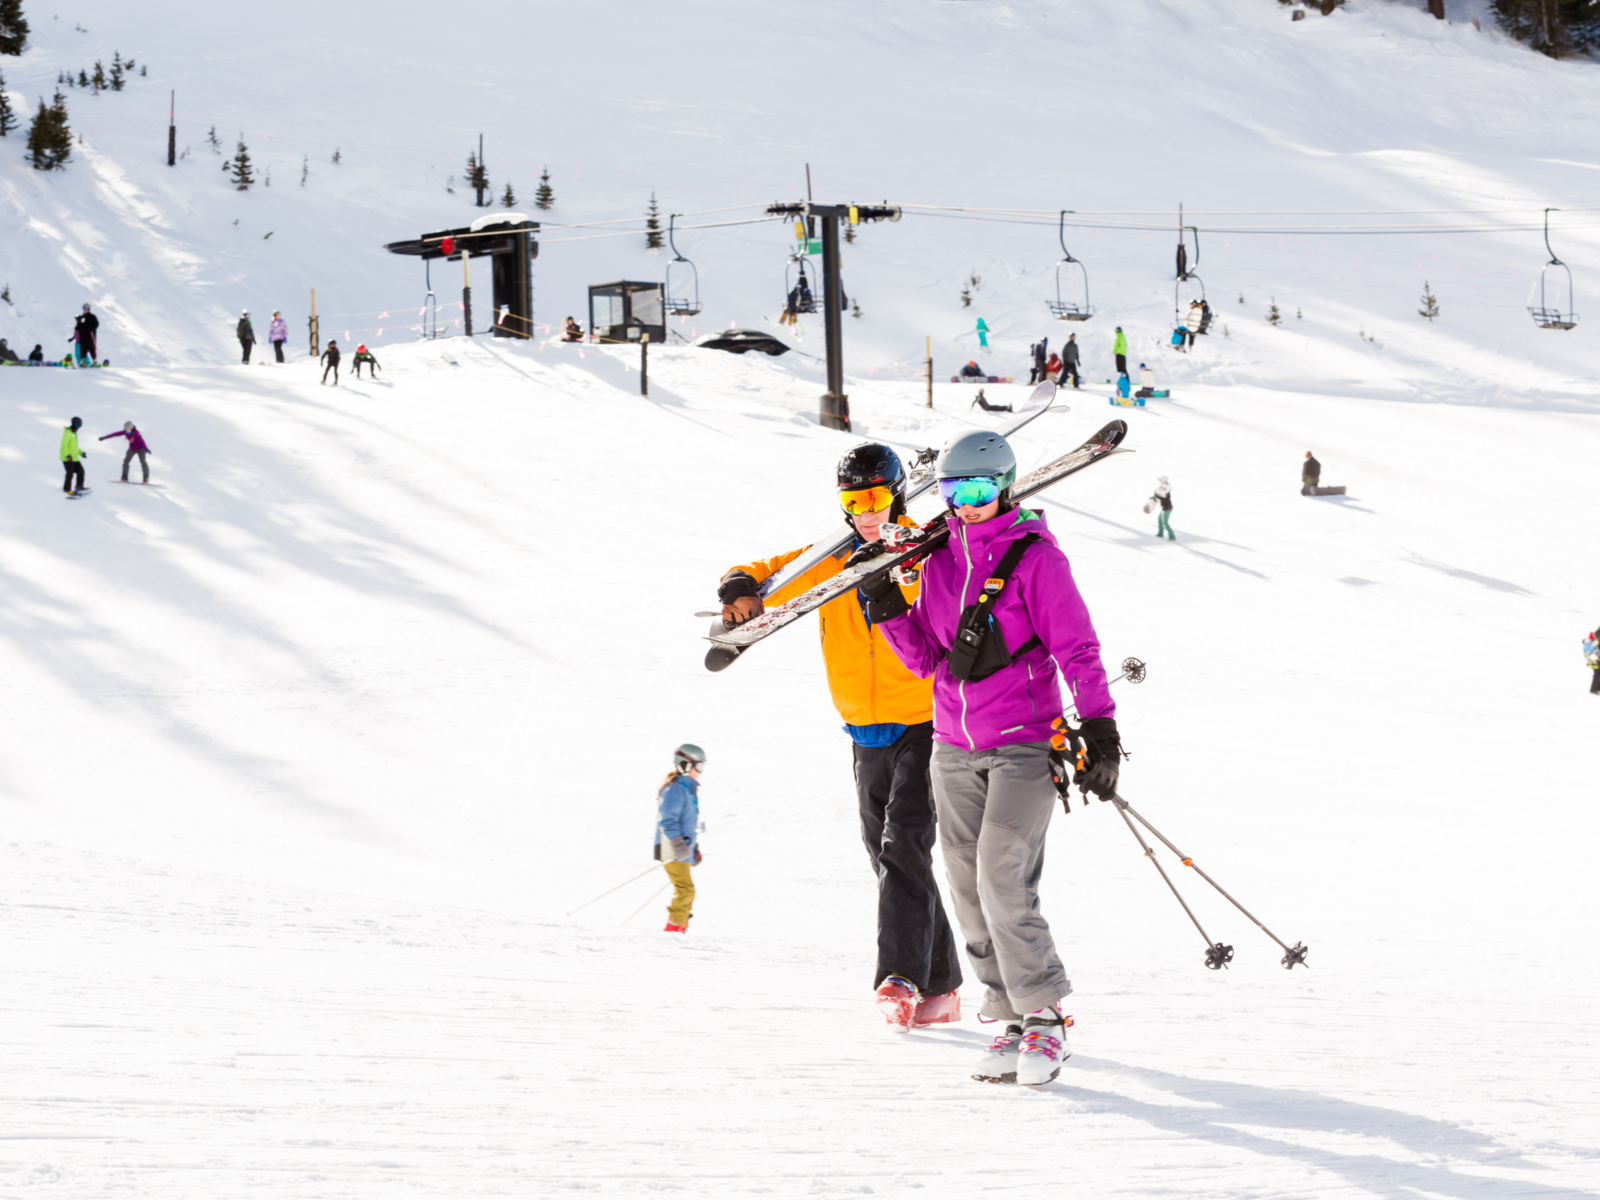 A couple lifting their ski on their shoulder and other skiers and snowboarders in background at Arapahoe Basin Ski Resort, one of the best ski resorts near Denver